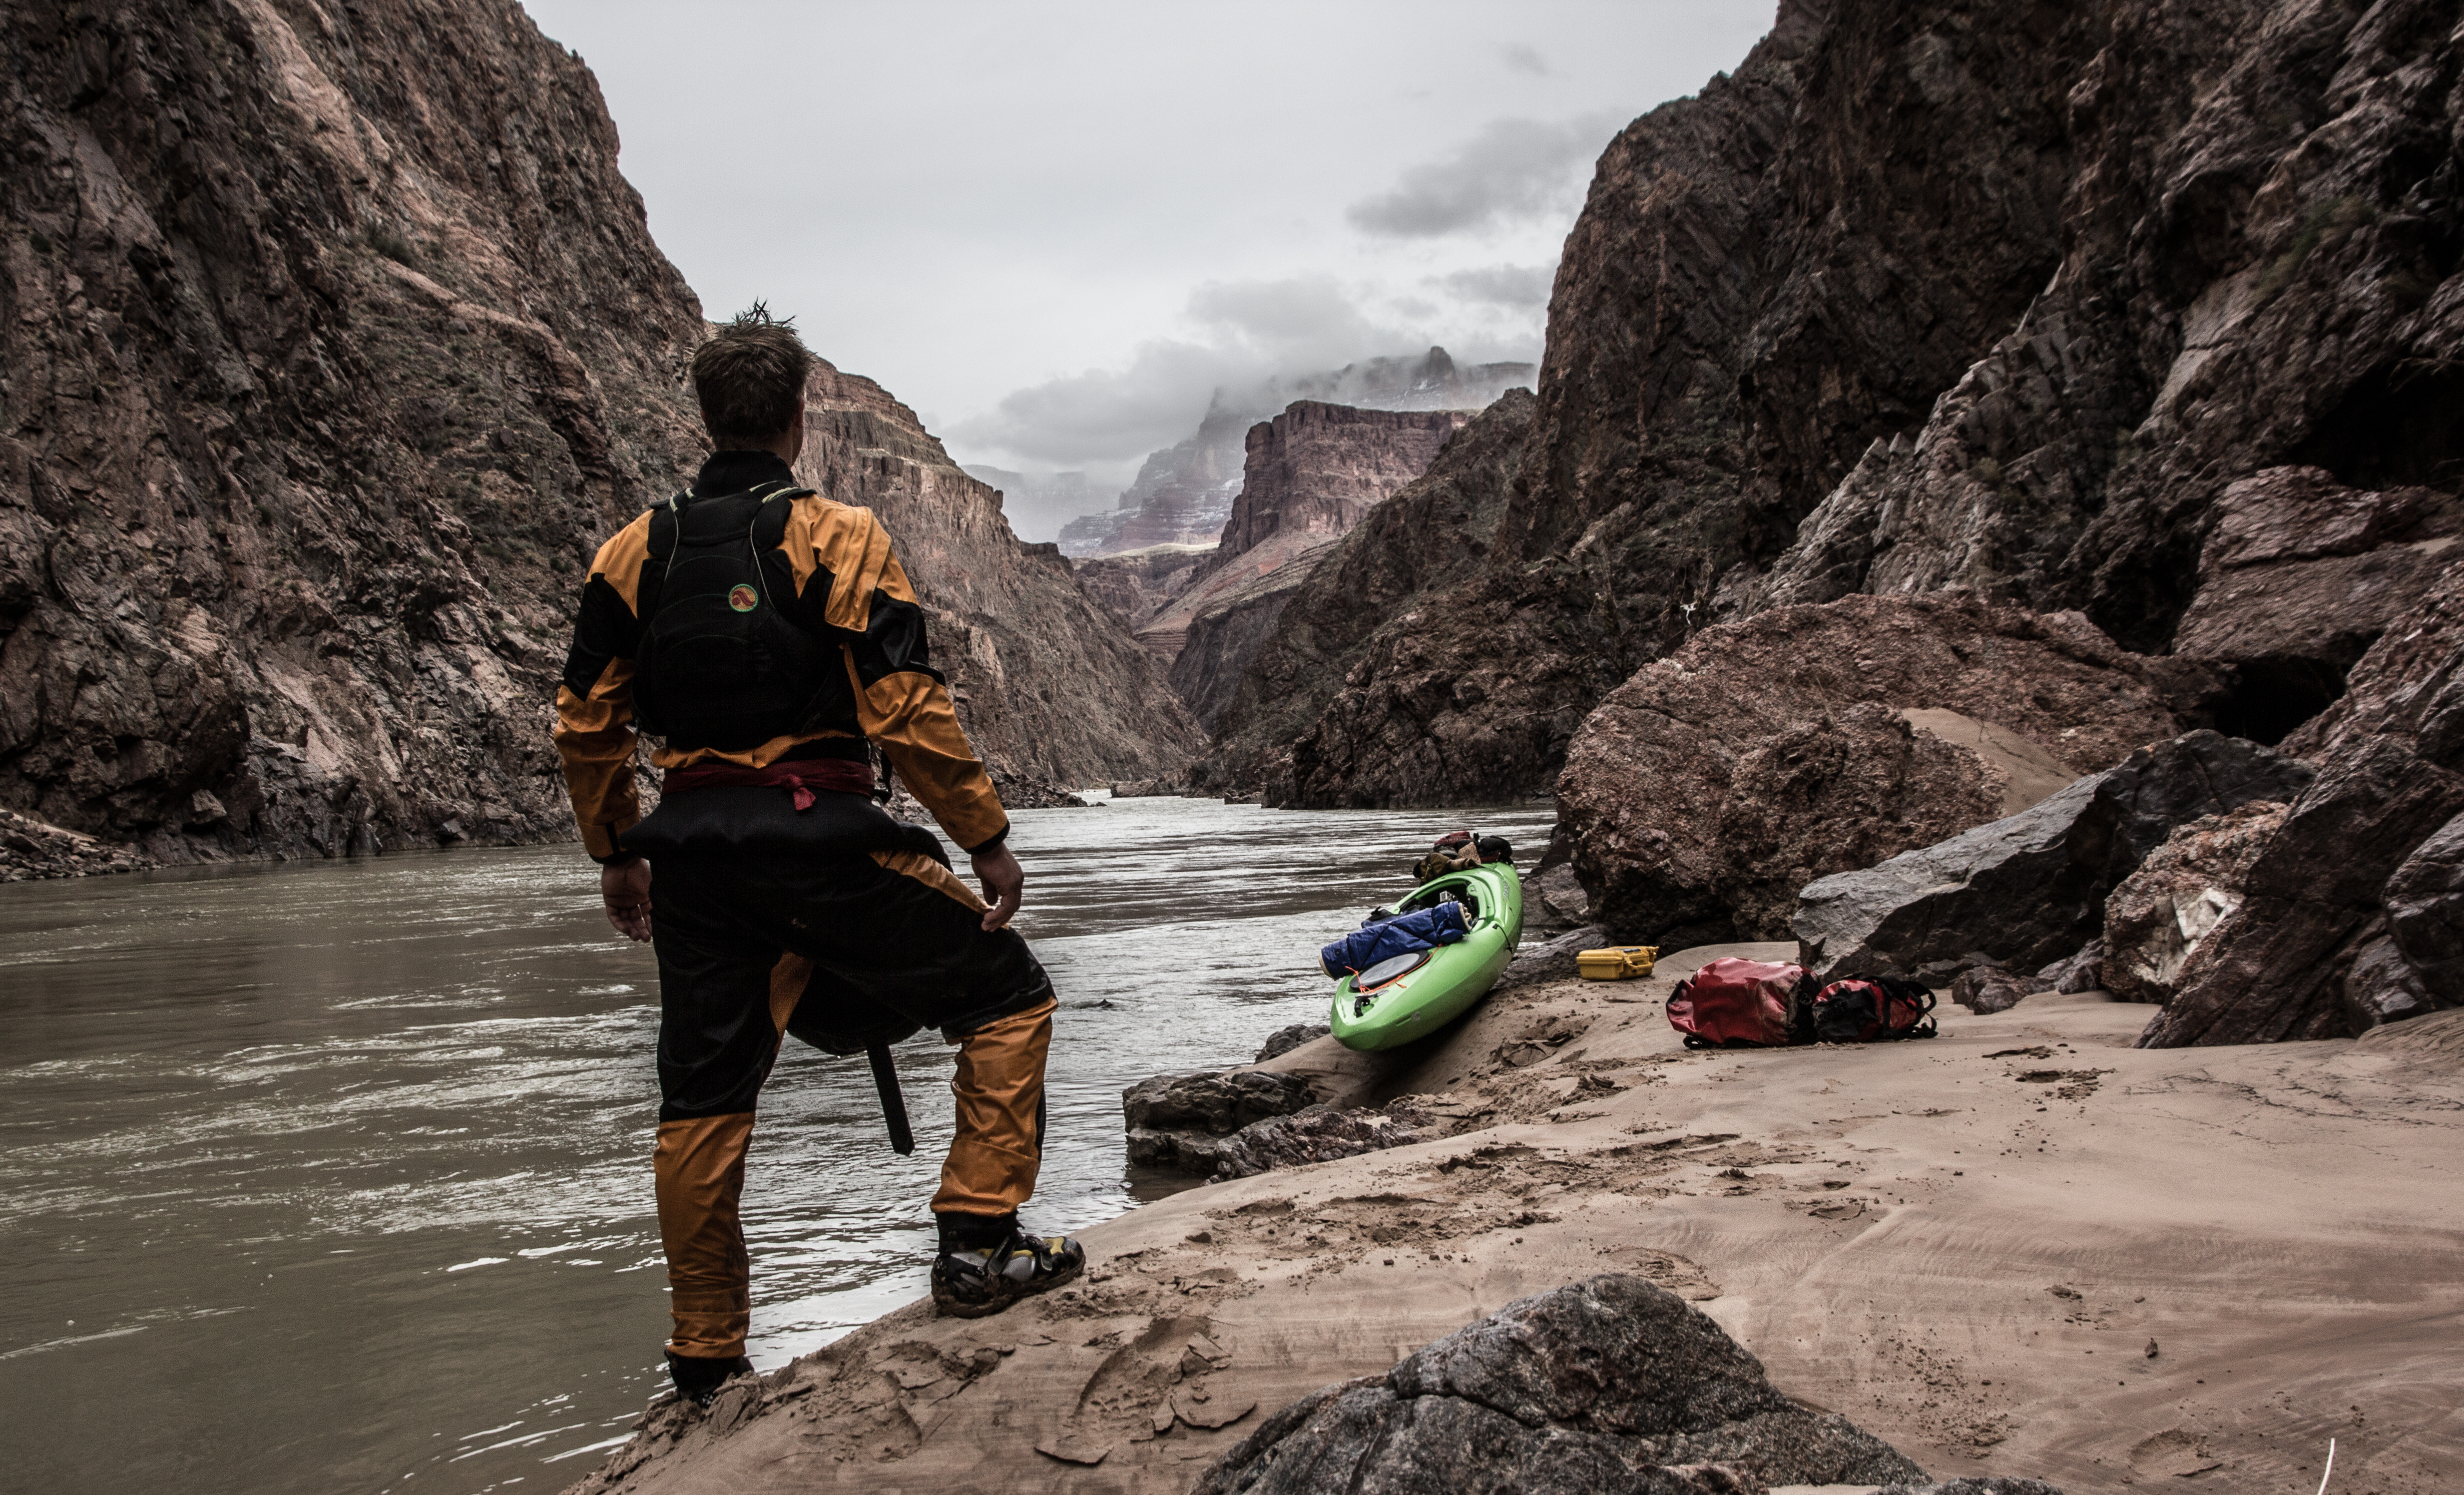 John Nestler has completed many wilderness expeditions including a 27-day solo kayak trip through the Grand Canyon.